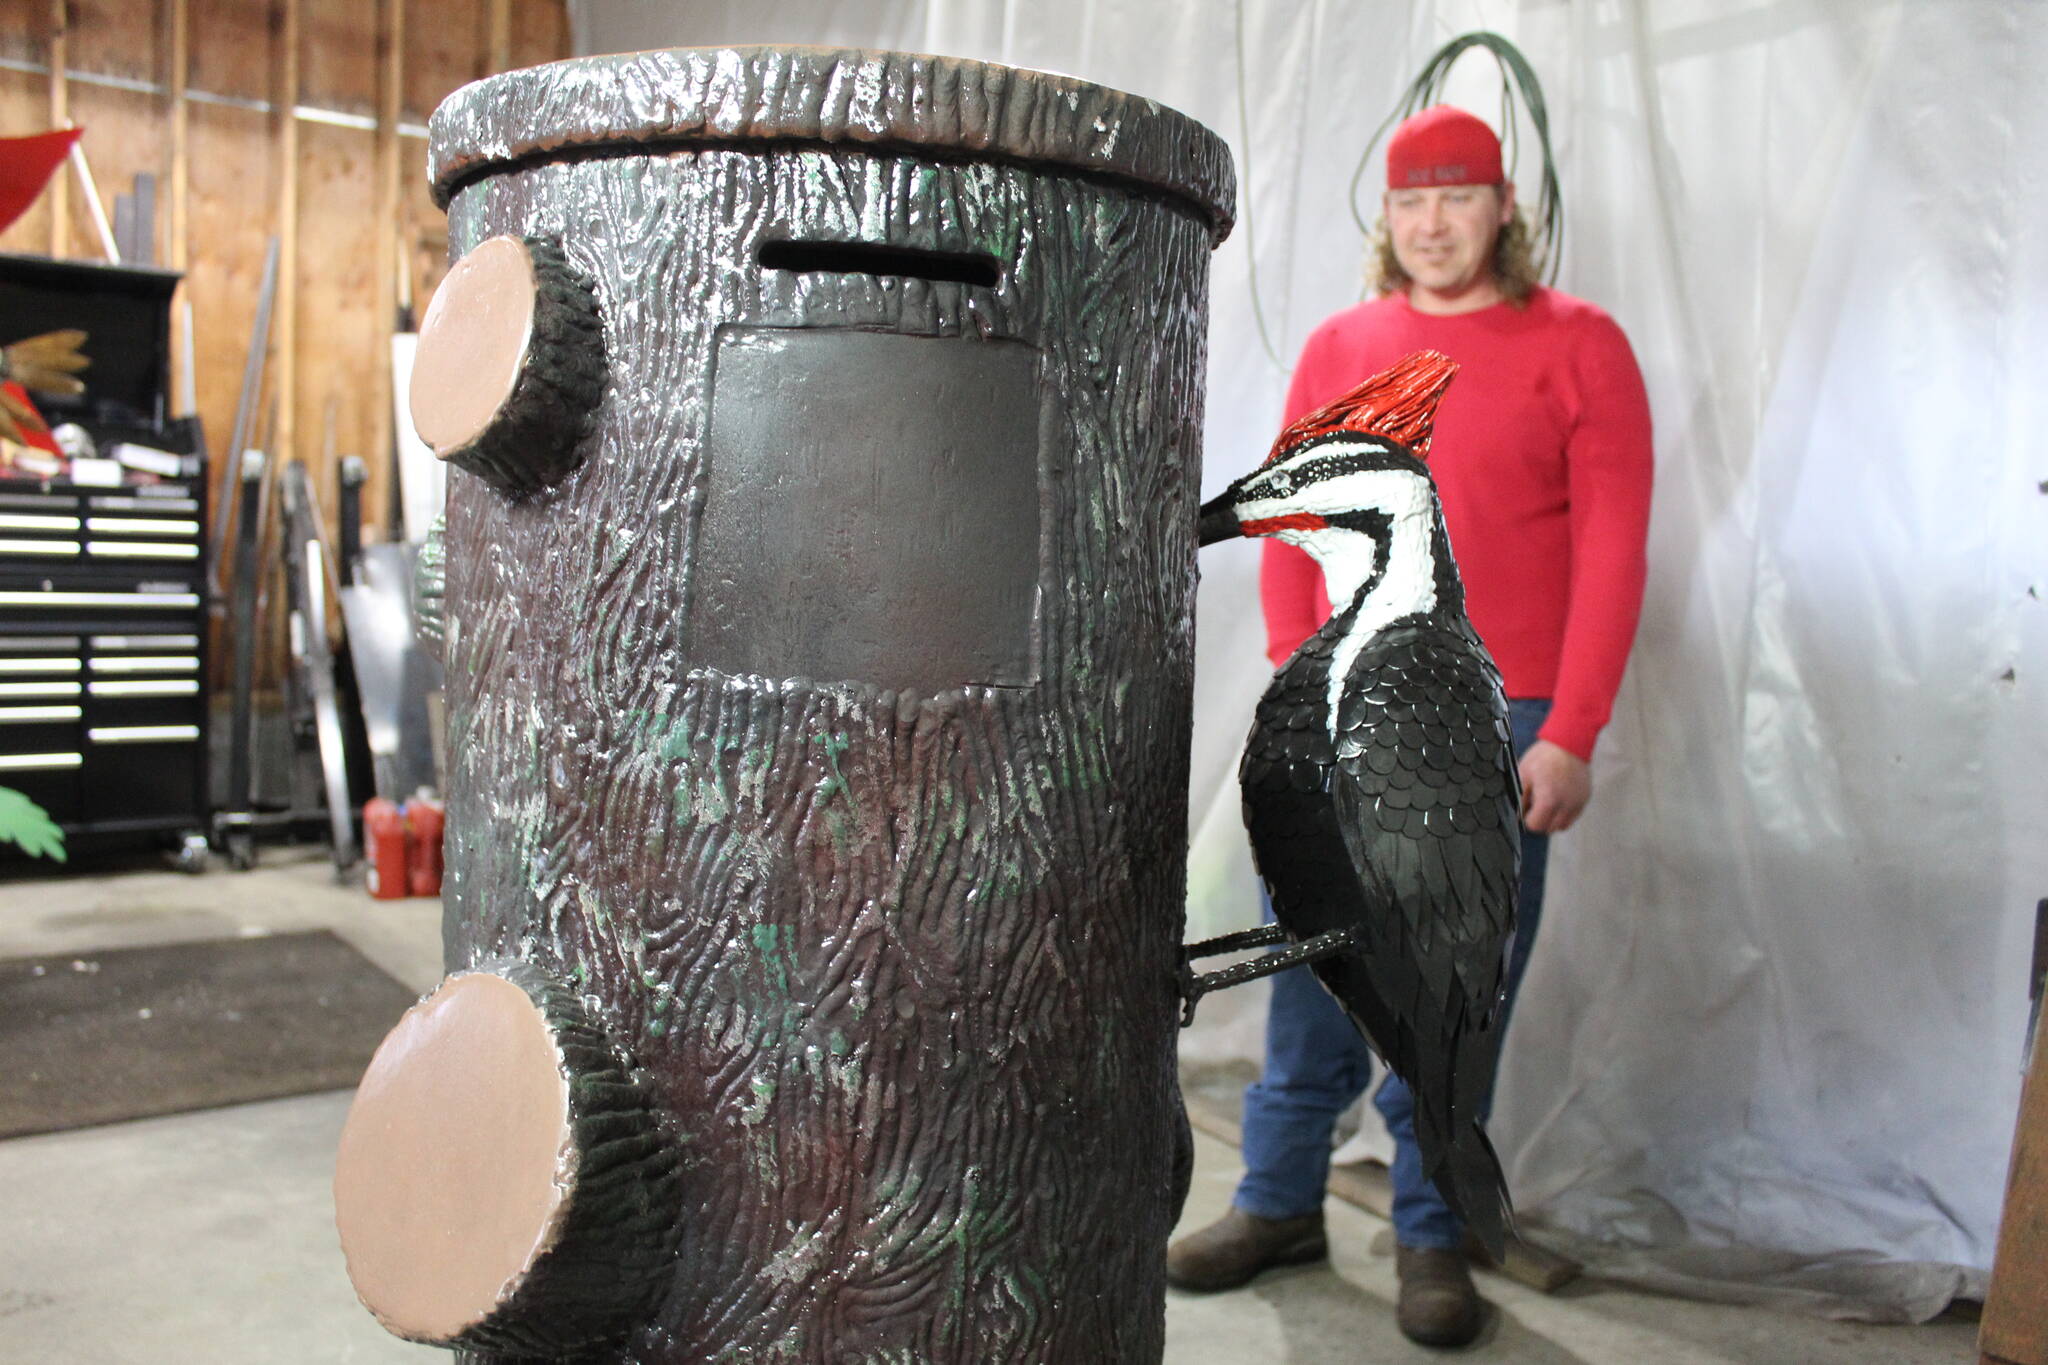 Casey Strelecki designed a donation box in the form of a tree stump adorned by a woodpecker. (Photo by Karina Andrew/Whidbey News-Times)